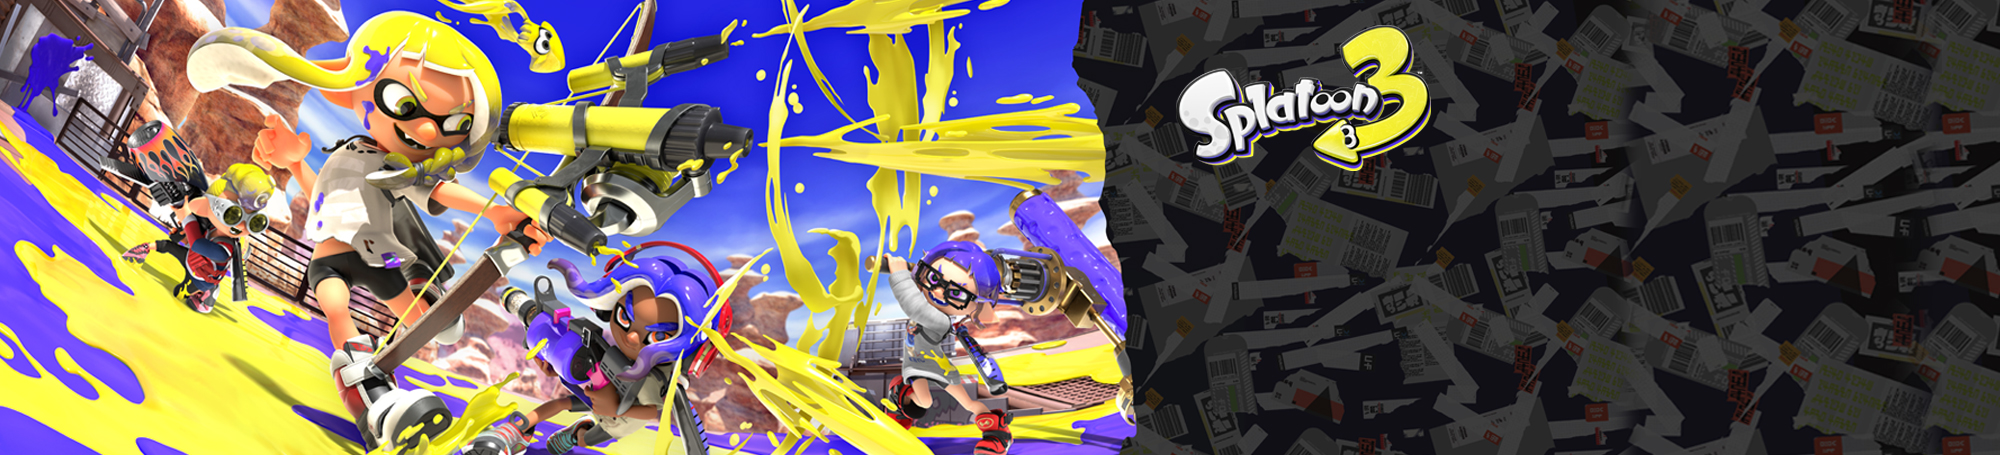 Splatoon 3. Cartoon characters spraying ink on each other.